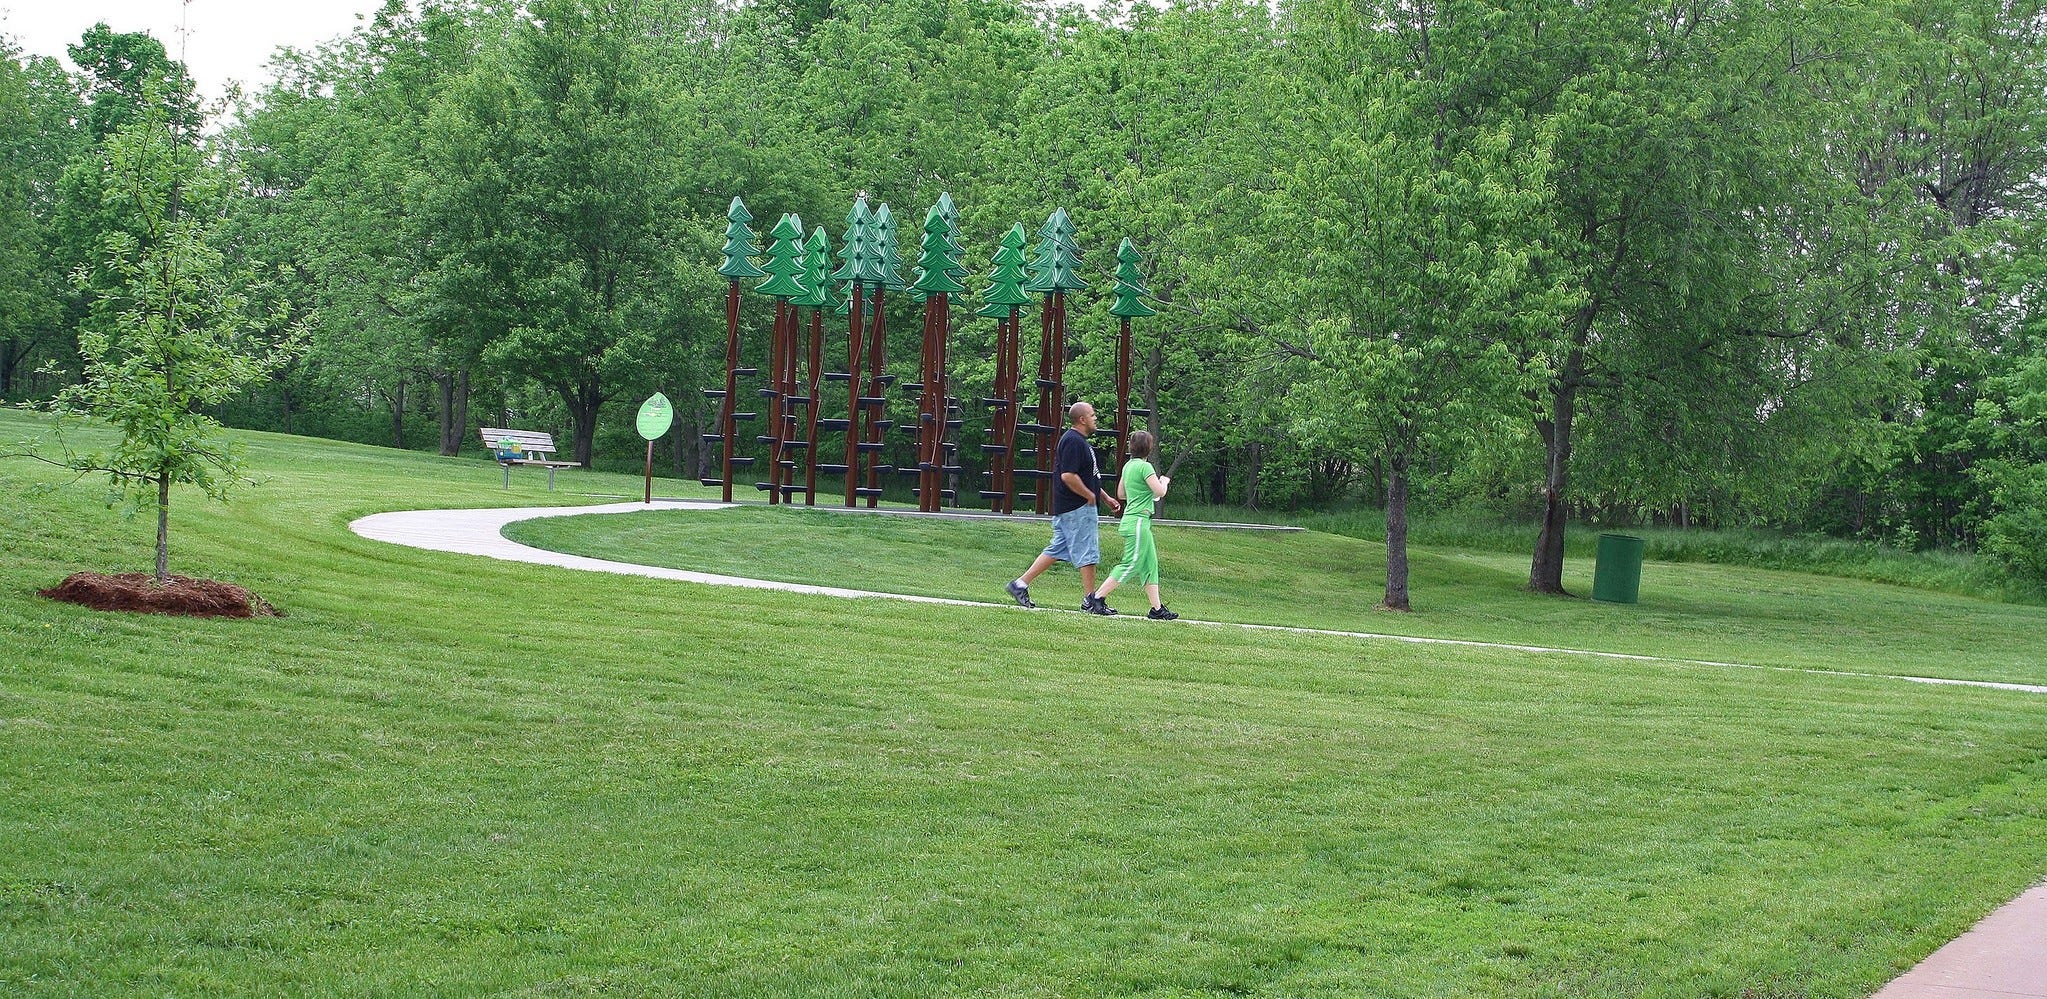 GameTime Releases New Playground Slides and PlayTrails Activities